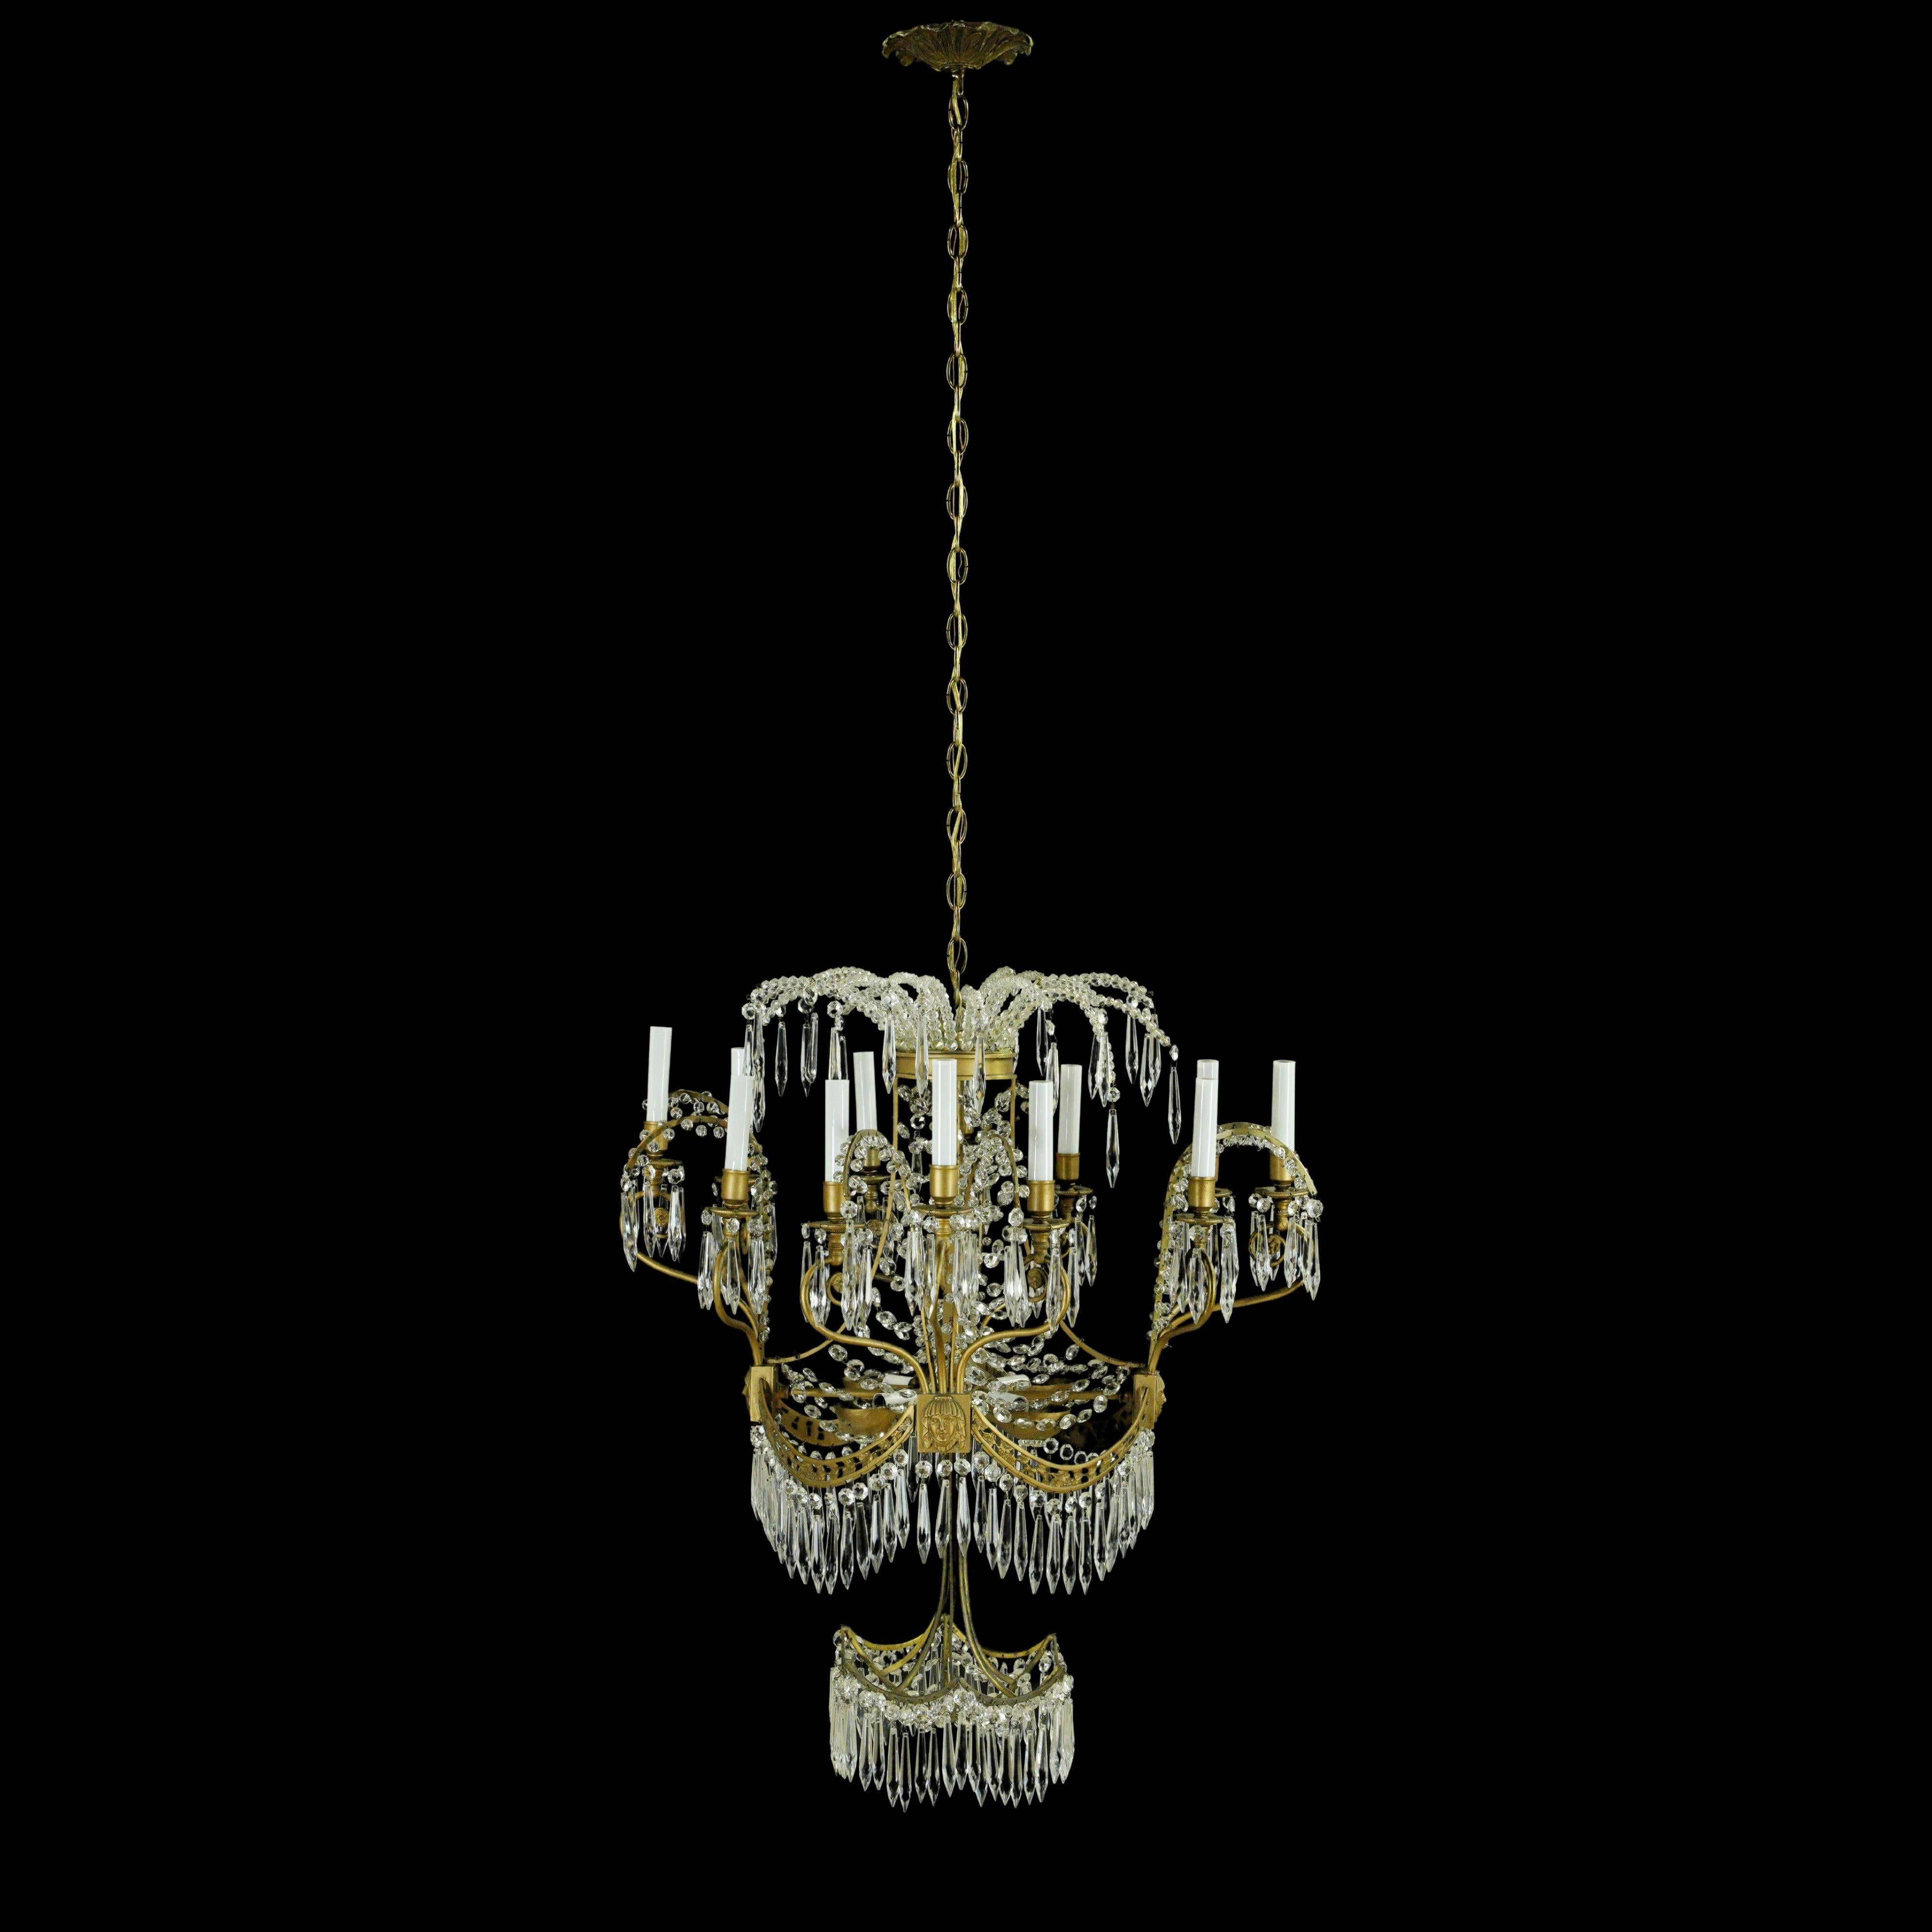 Russian crystal and Dore bronze 12 arm chandelier with figural details from the Plaza Hotel, New York, New York. It has been completely restored and rewired. This light requires 16 candelabra light bulbs. One available. Cleaned and restored. Please